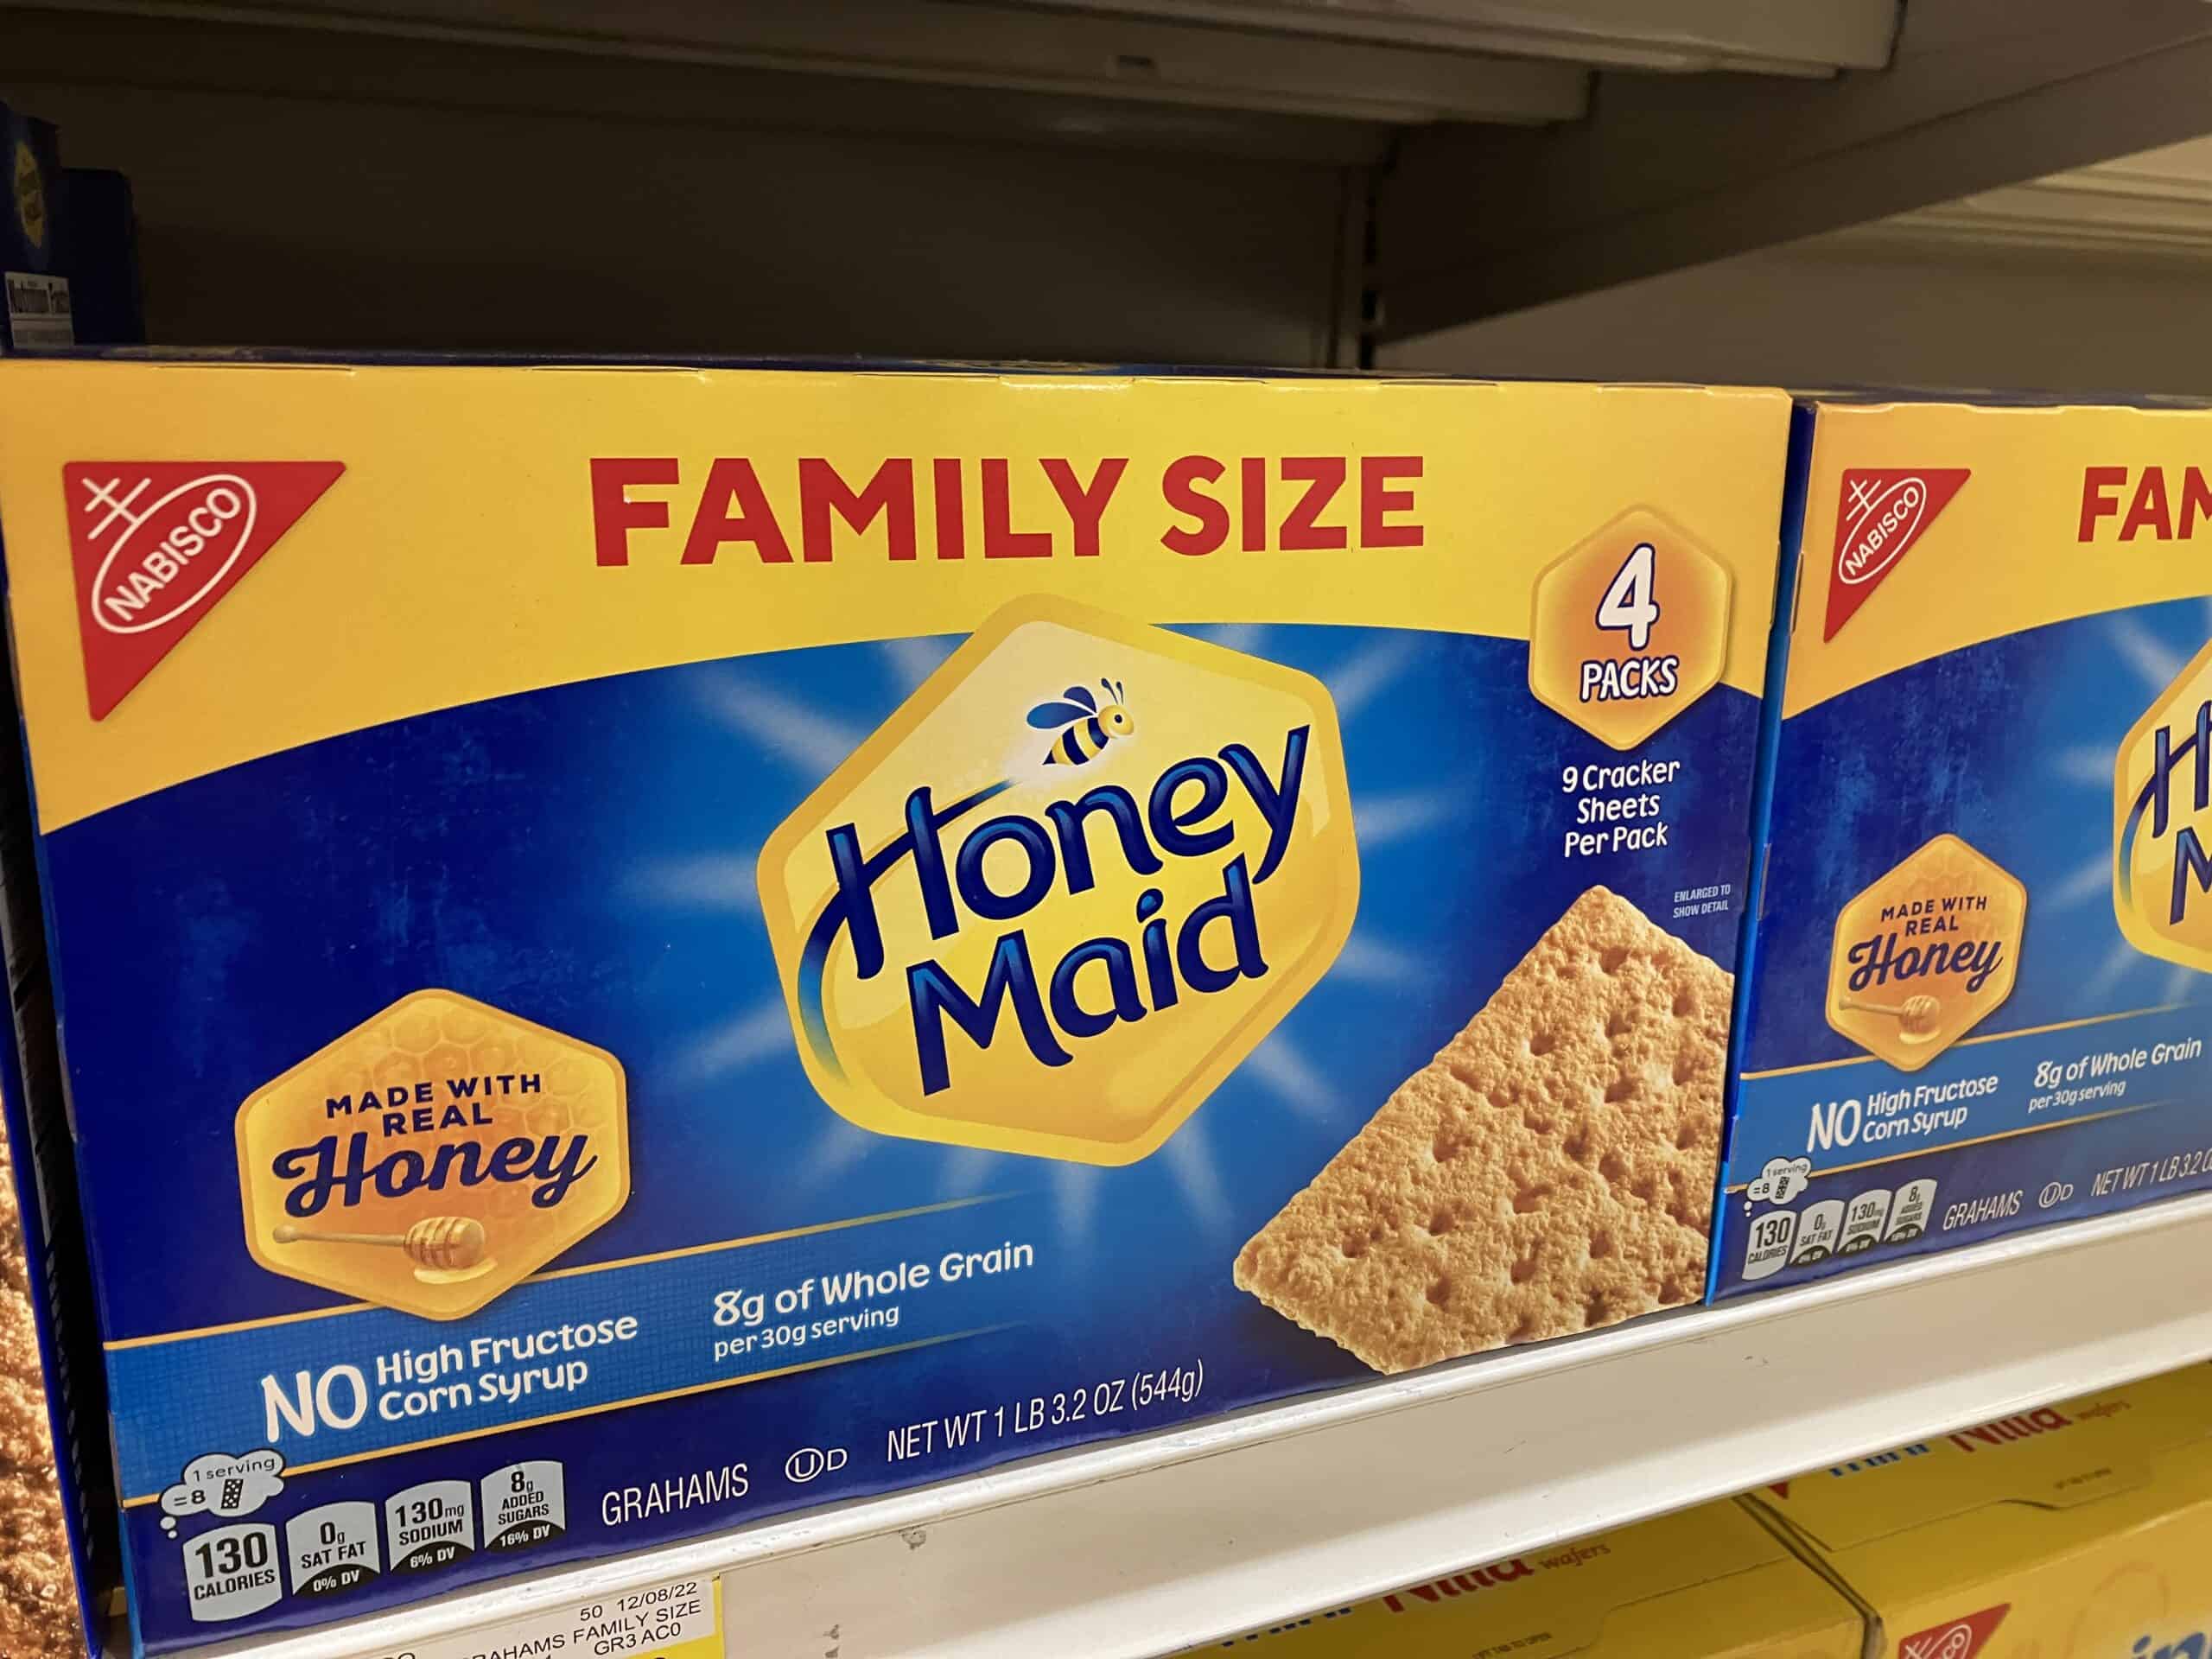 Family size package of Honey Maid graham crackers